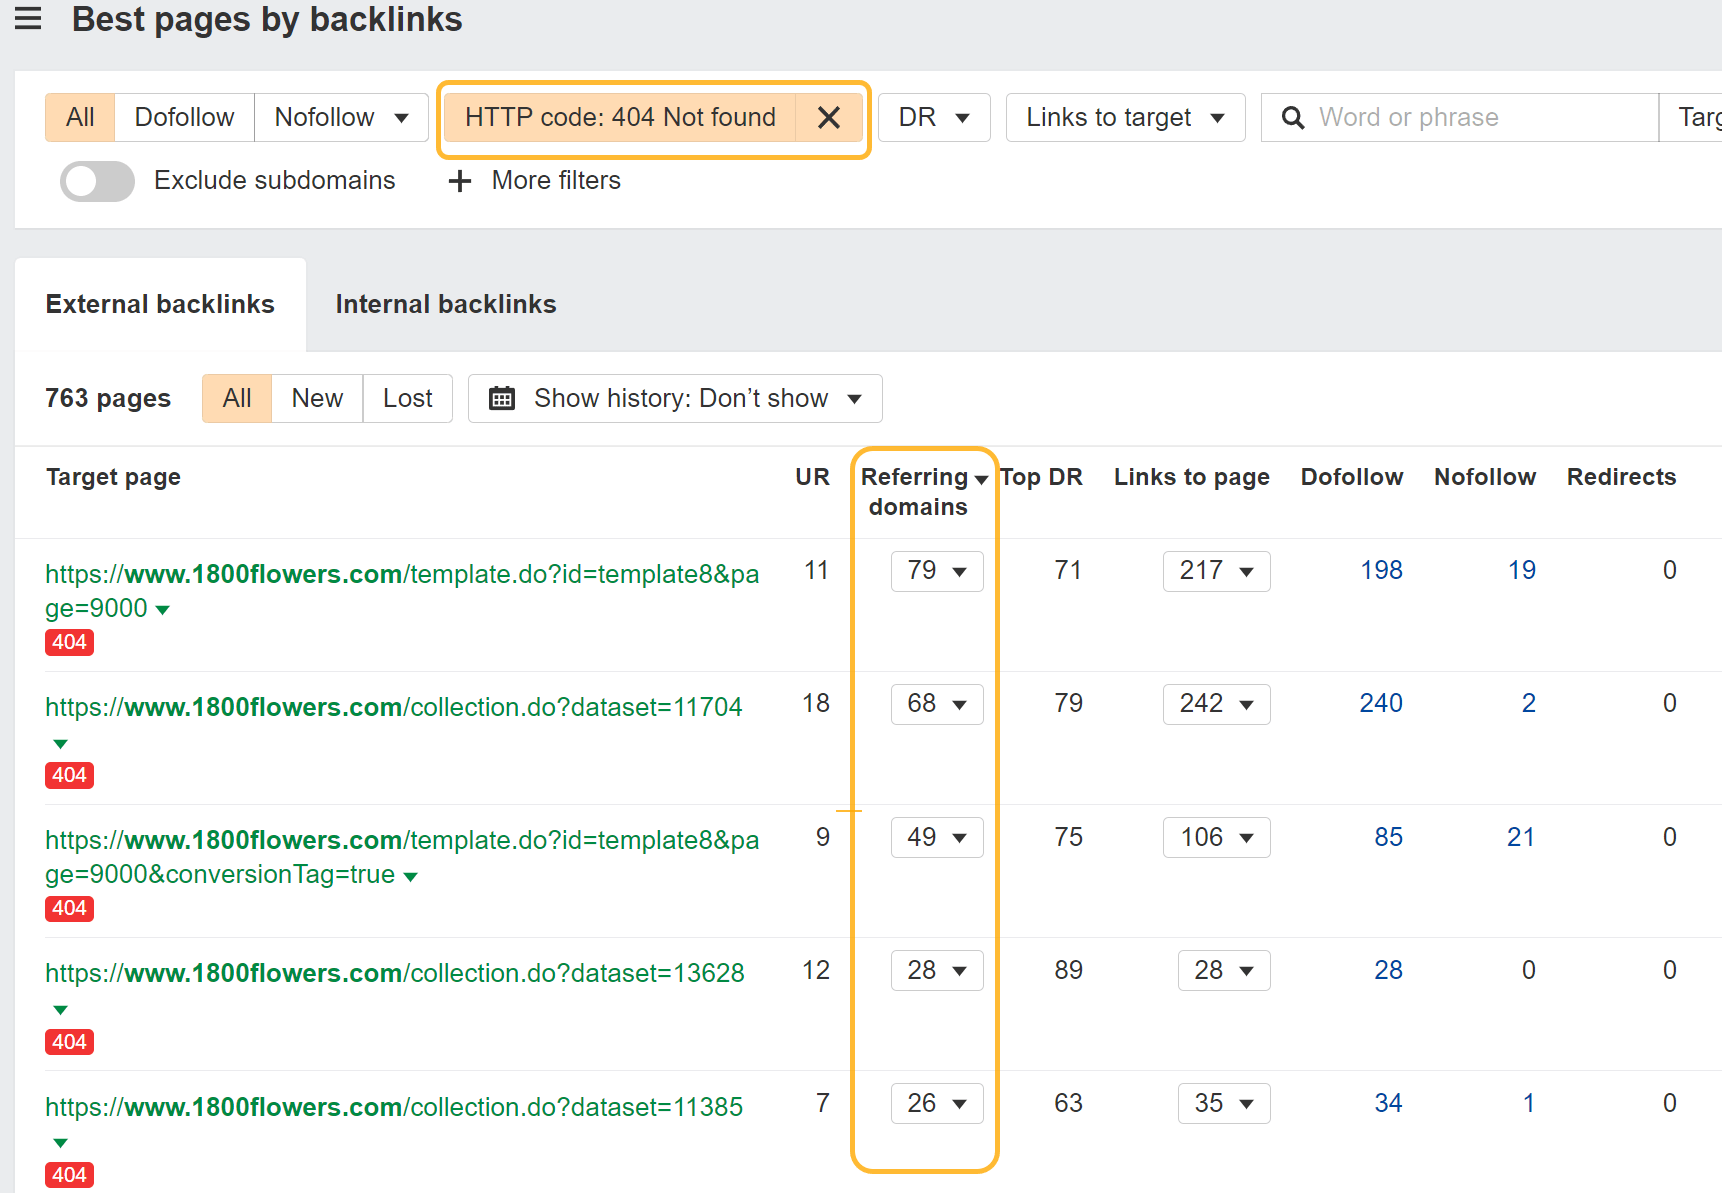 Best by links report filtered to 404 status code to show pages you may want to redirect